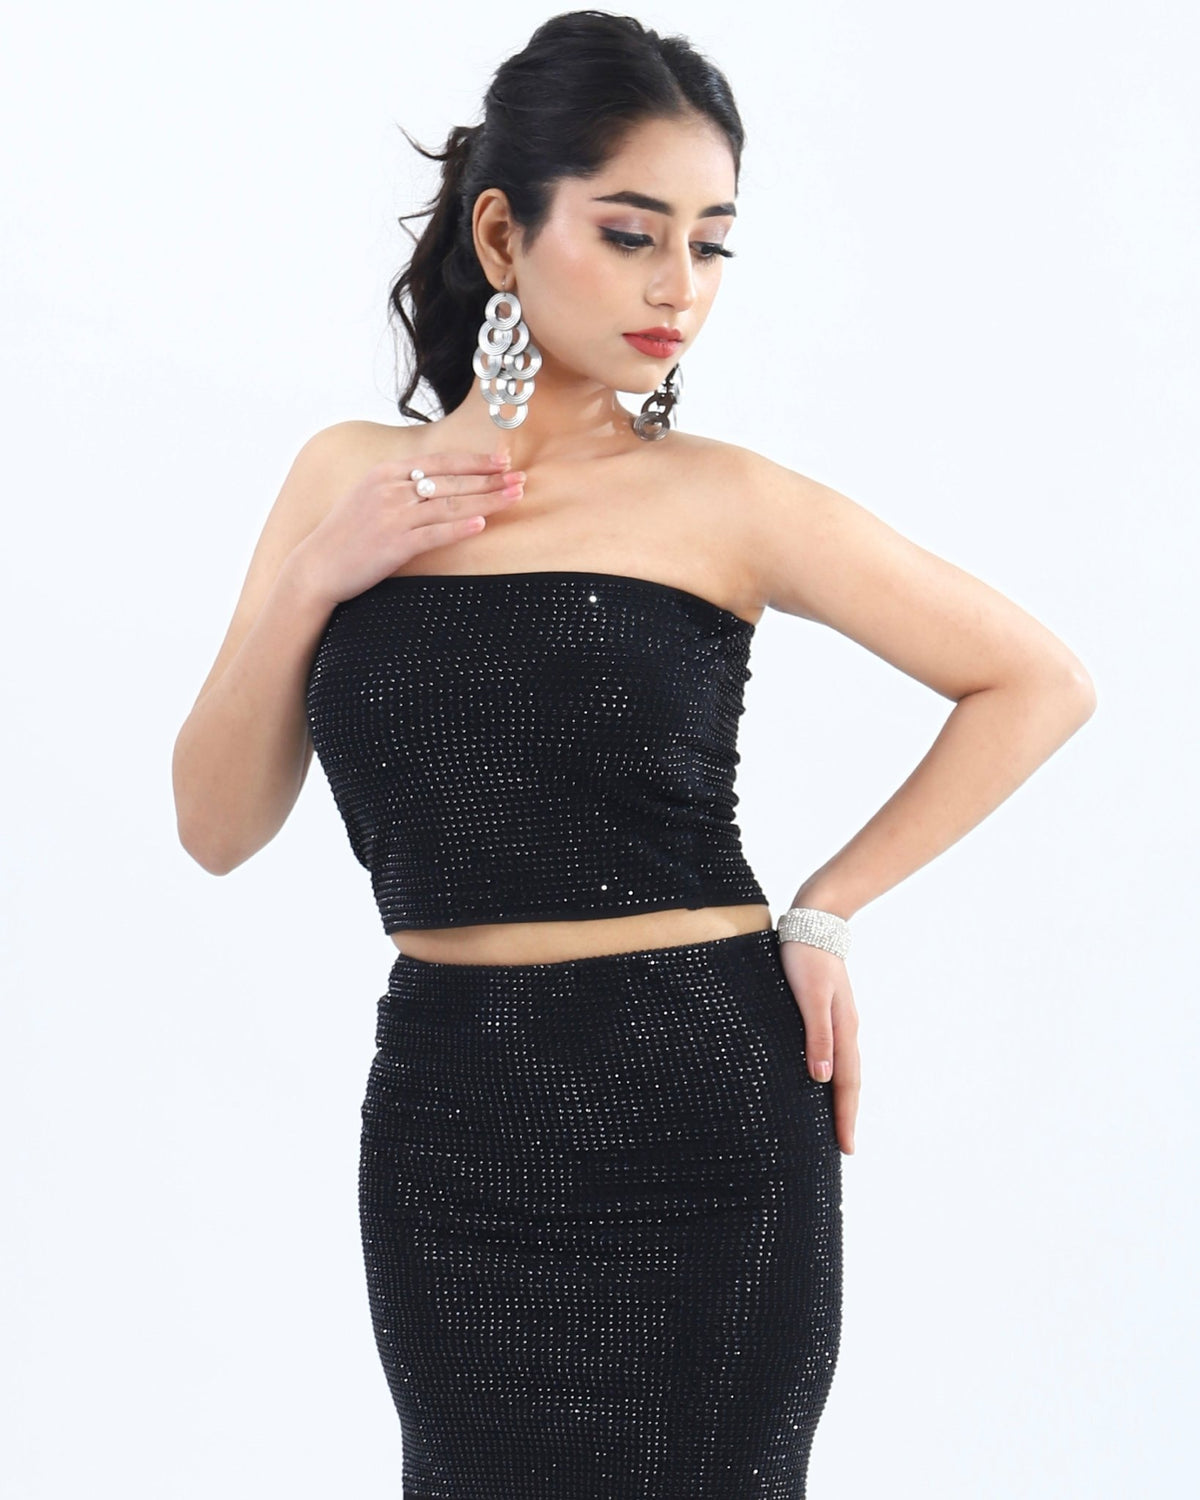 Woman in a black sequined strapless top and skirt set, posing against a simple background.